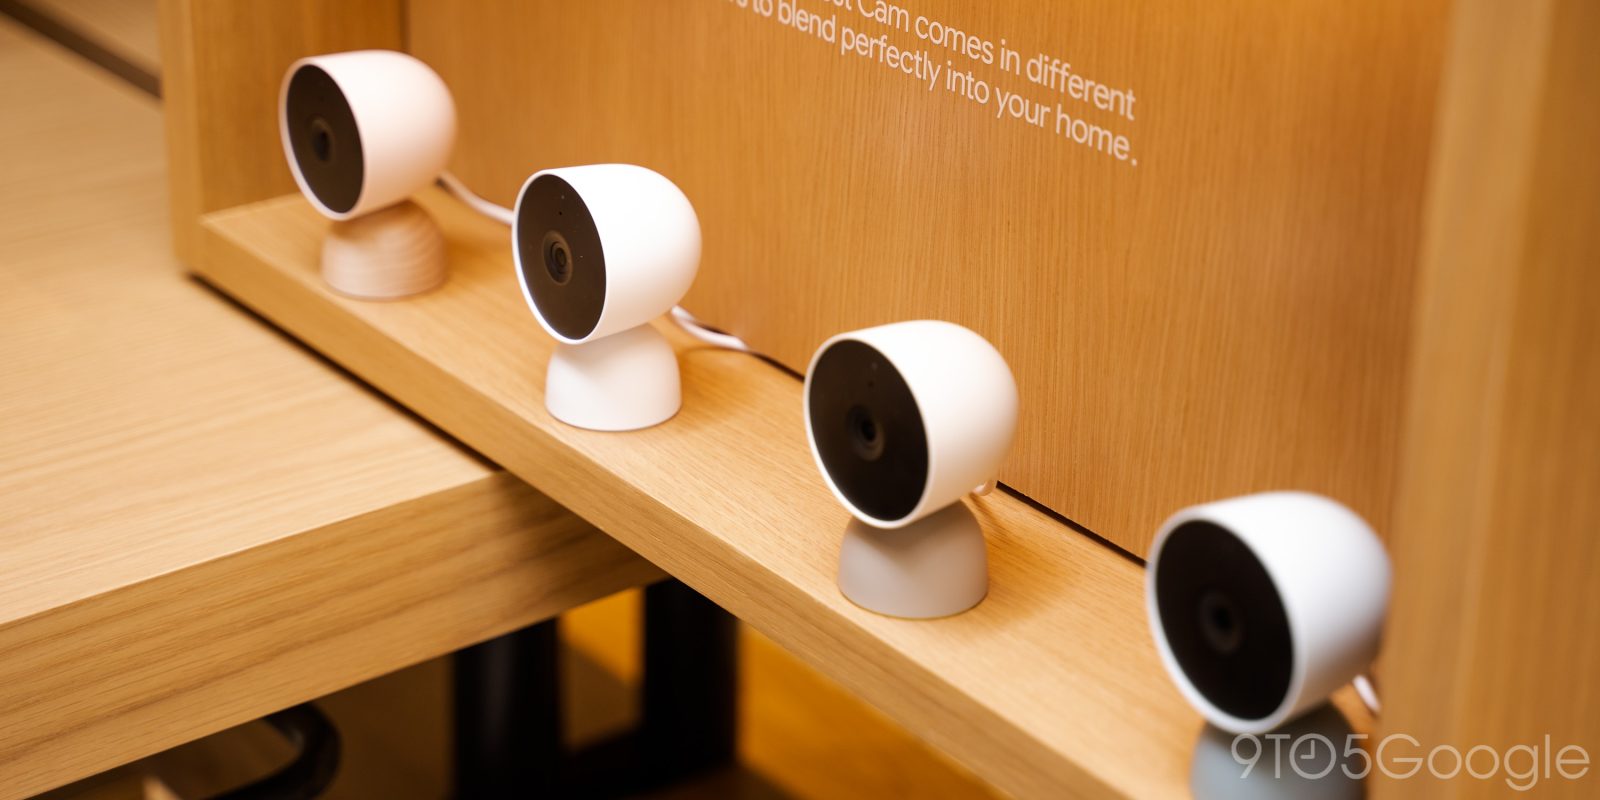 Google partners to give AAPI small biz Nest Cam Kit - 9to5Google